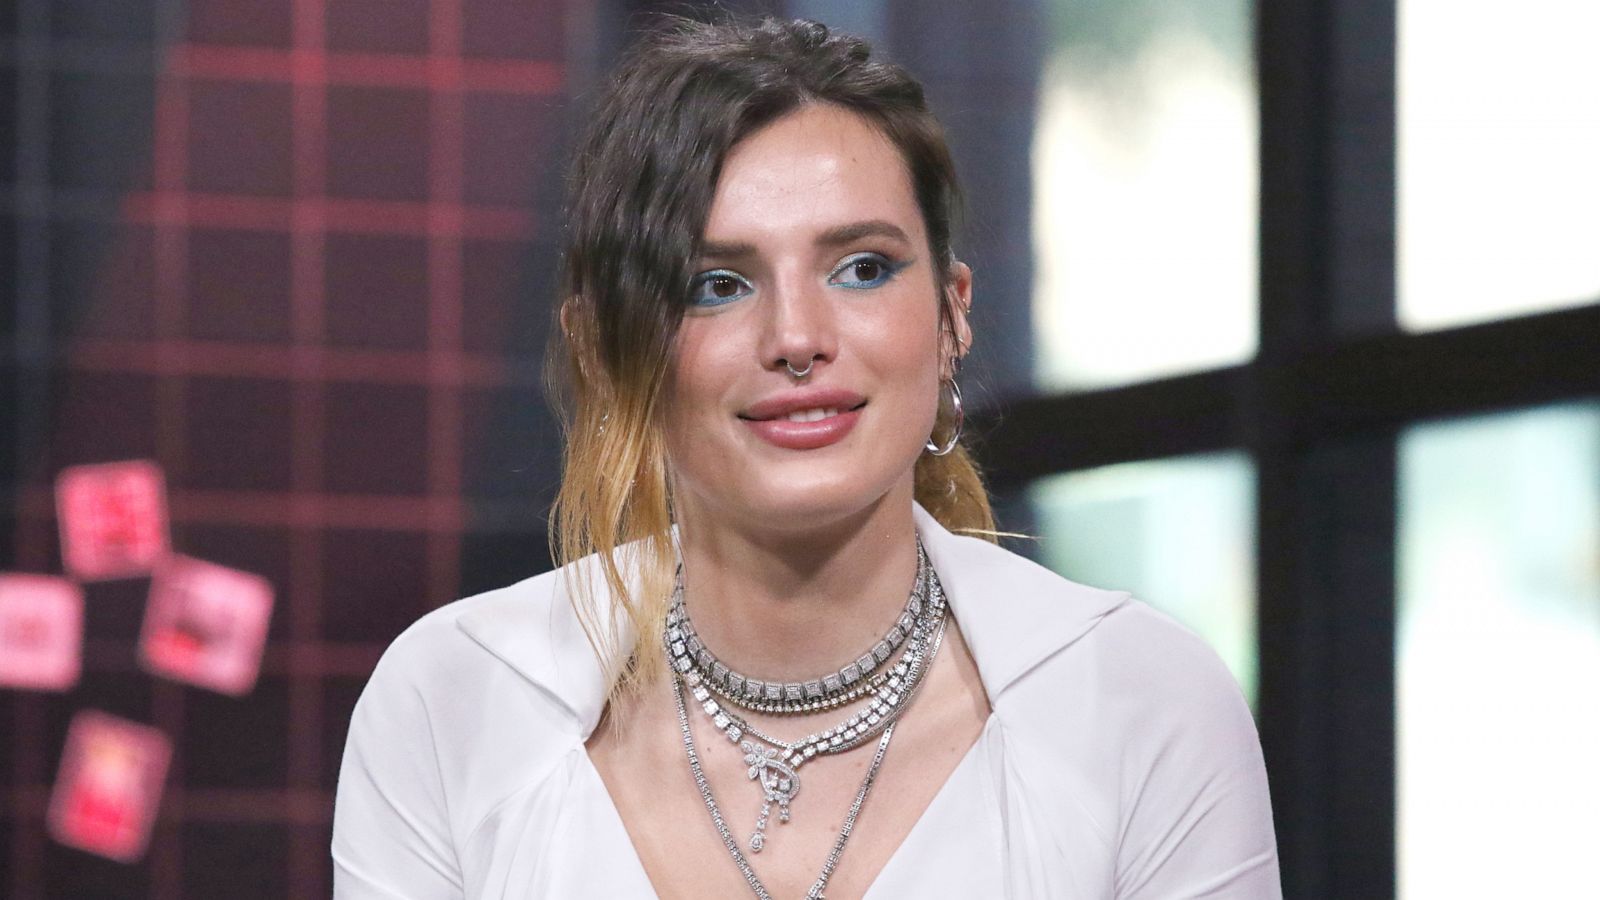 1600px x 900px - Bella Thorne shares personal photos after hacker threatens to extort her  over them - Good Morning America